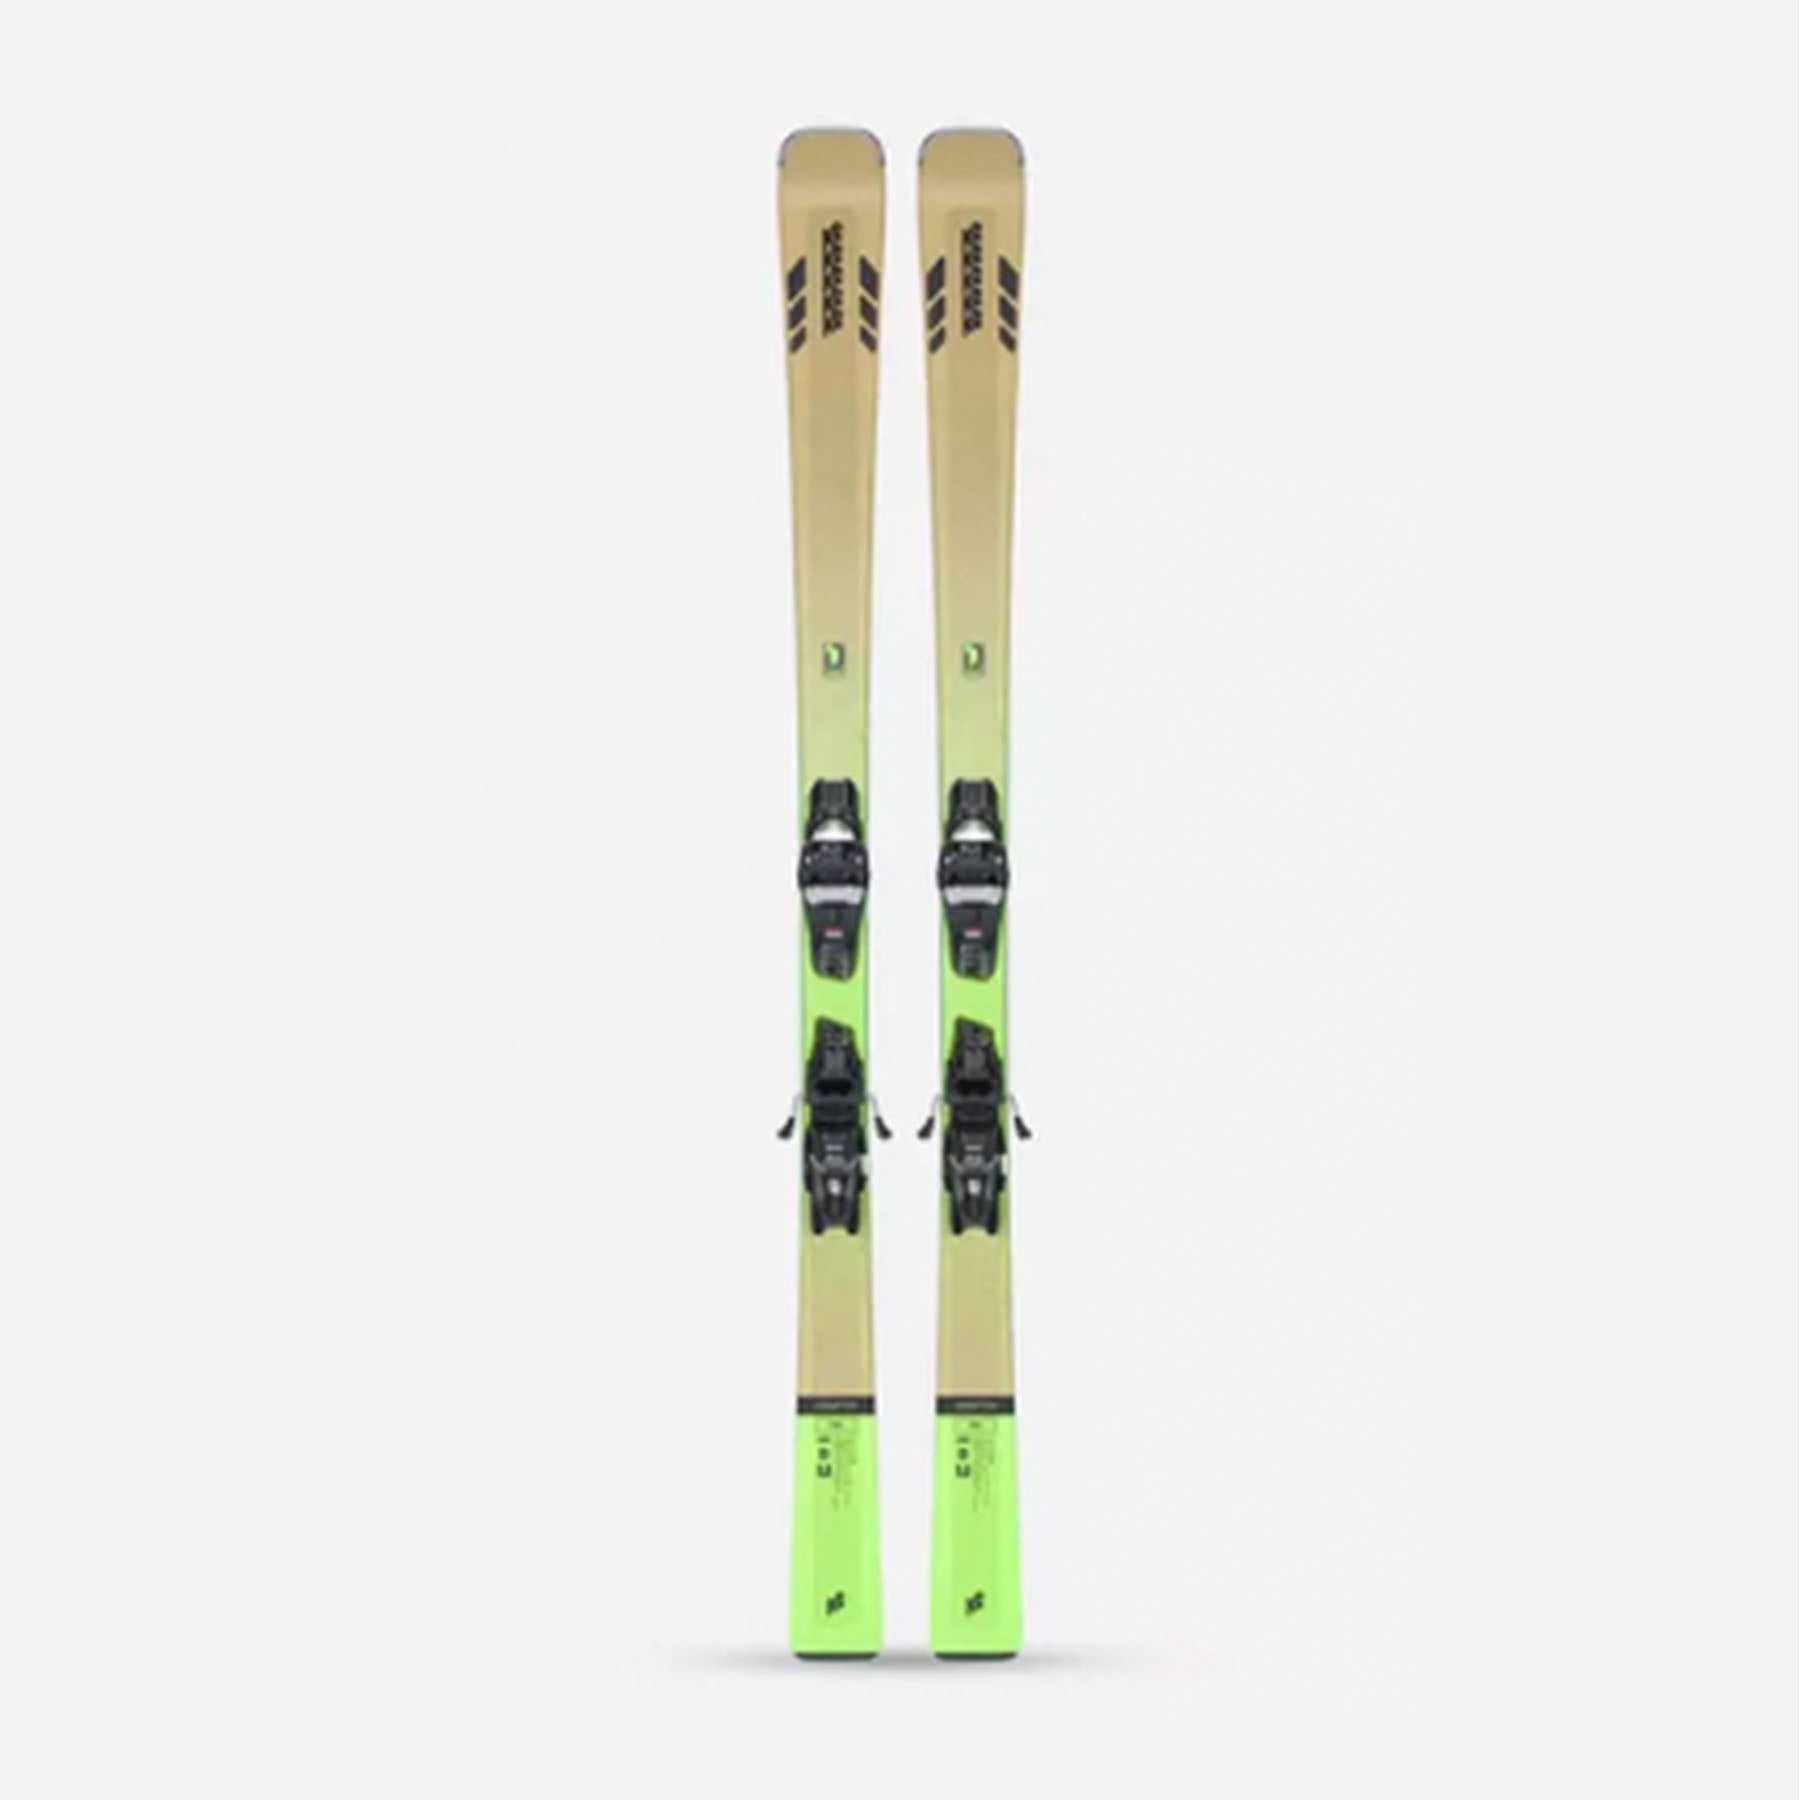 Hero image featuring the top of the K2 Men's Disruption 78c skis in multi color with bright green, light brown, and black bindings.